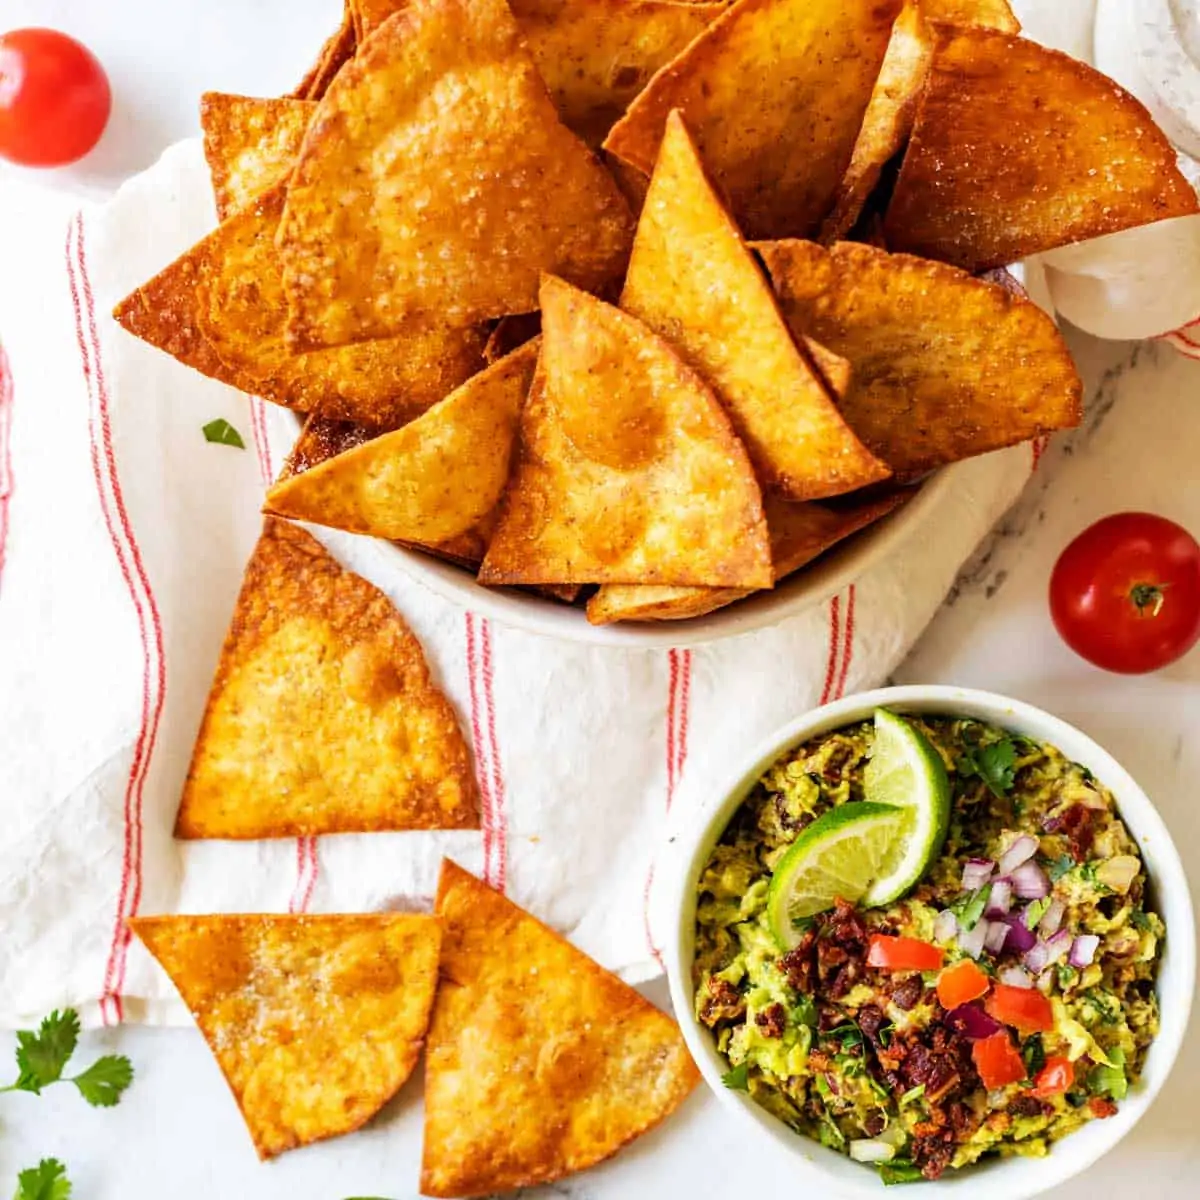 https://kicking-carbs.com/wp-content/uploads/2021/04/SQ-low-carb-tortilla-chips-Hnew.jpg